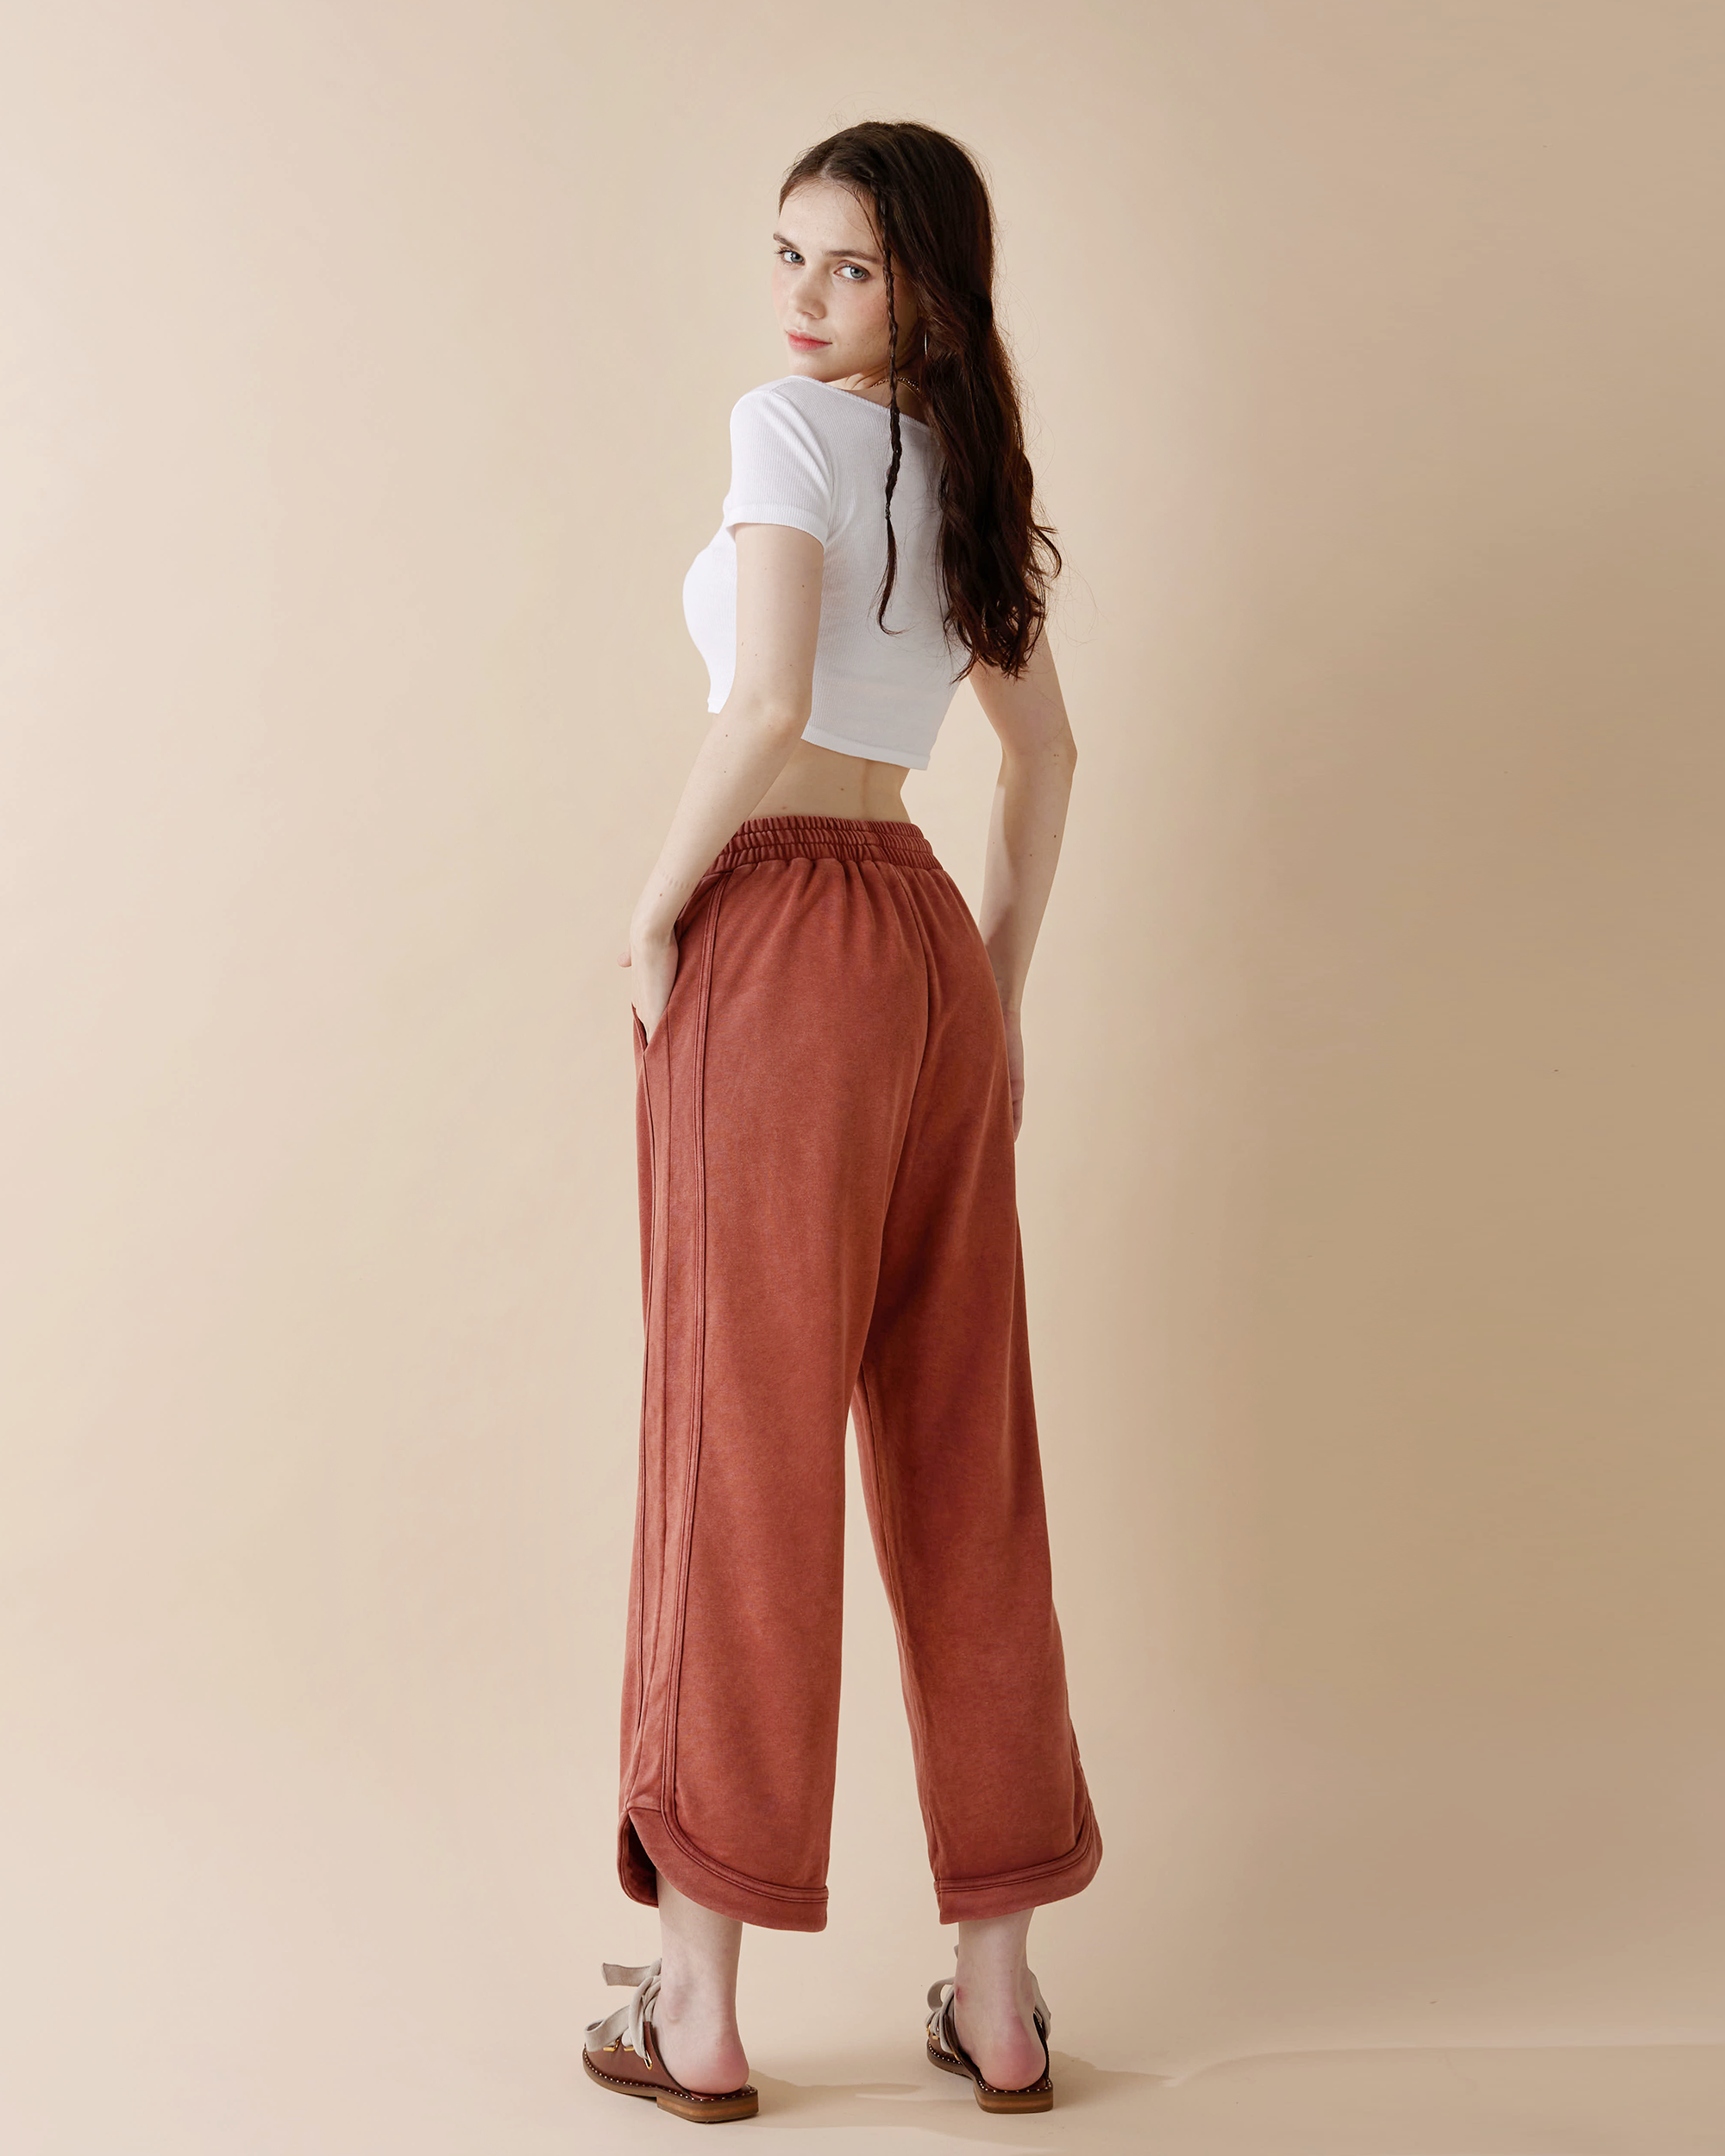 Rust Washed Terry Knit Crop Pants